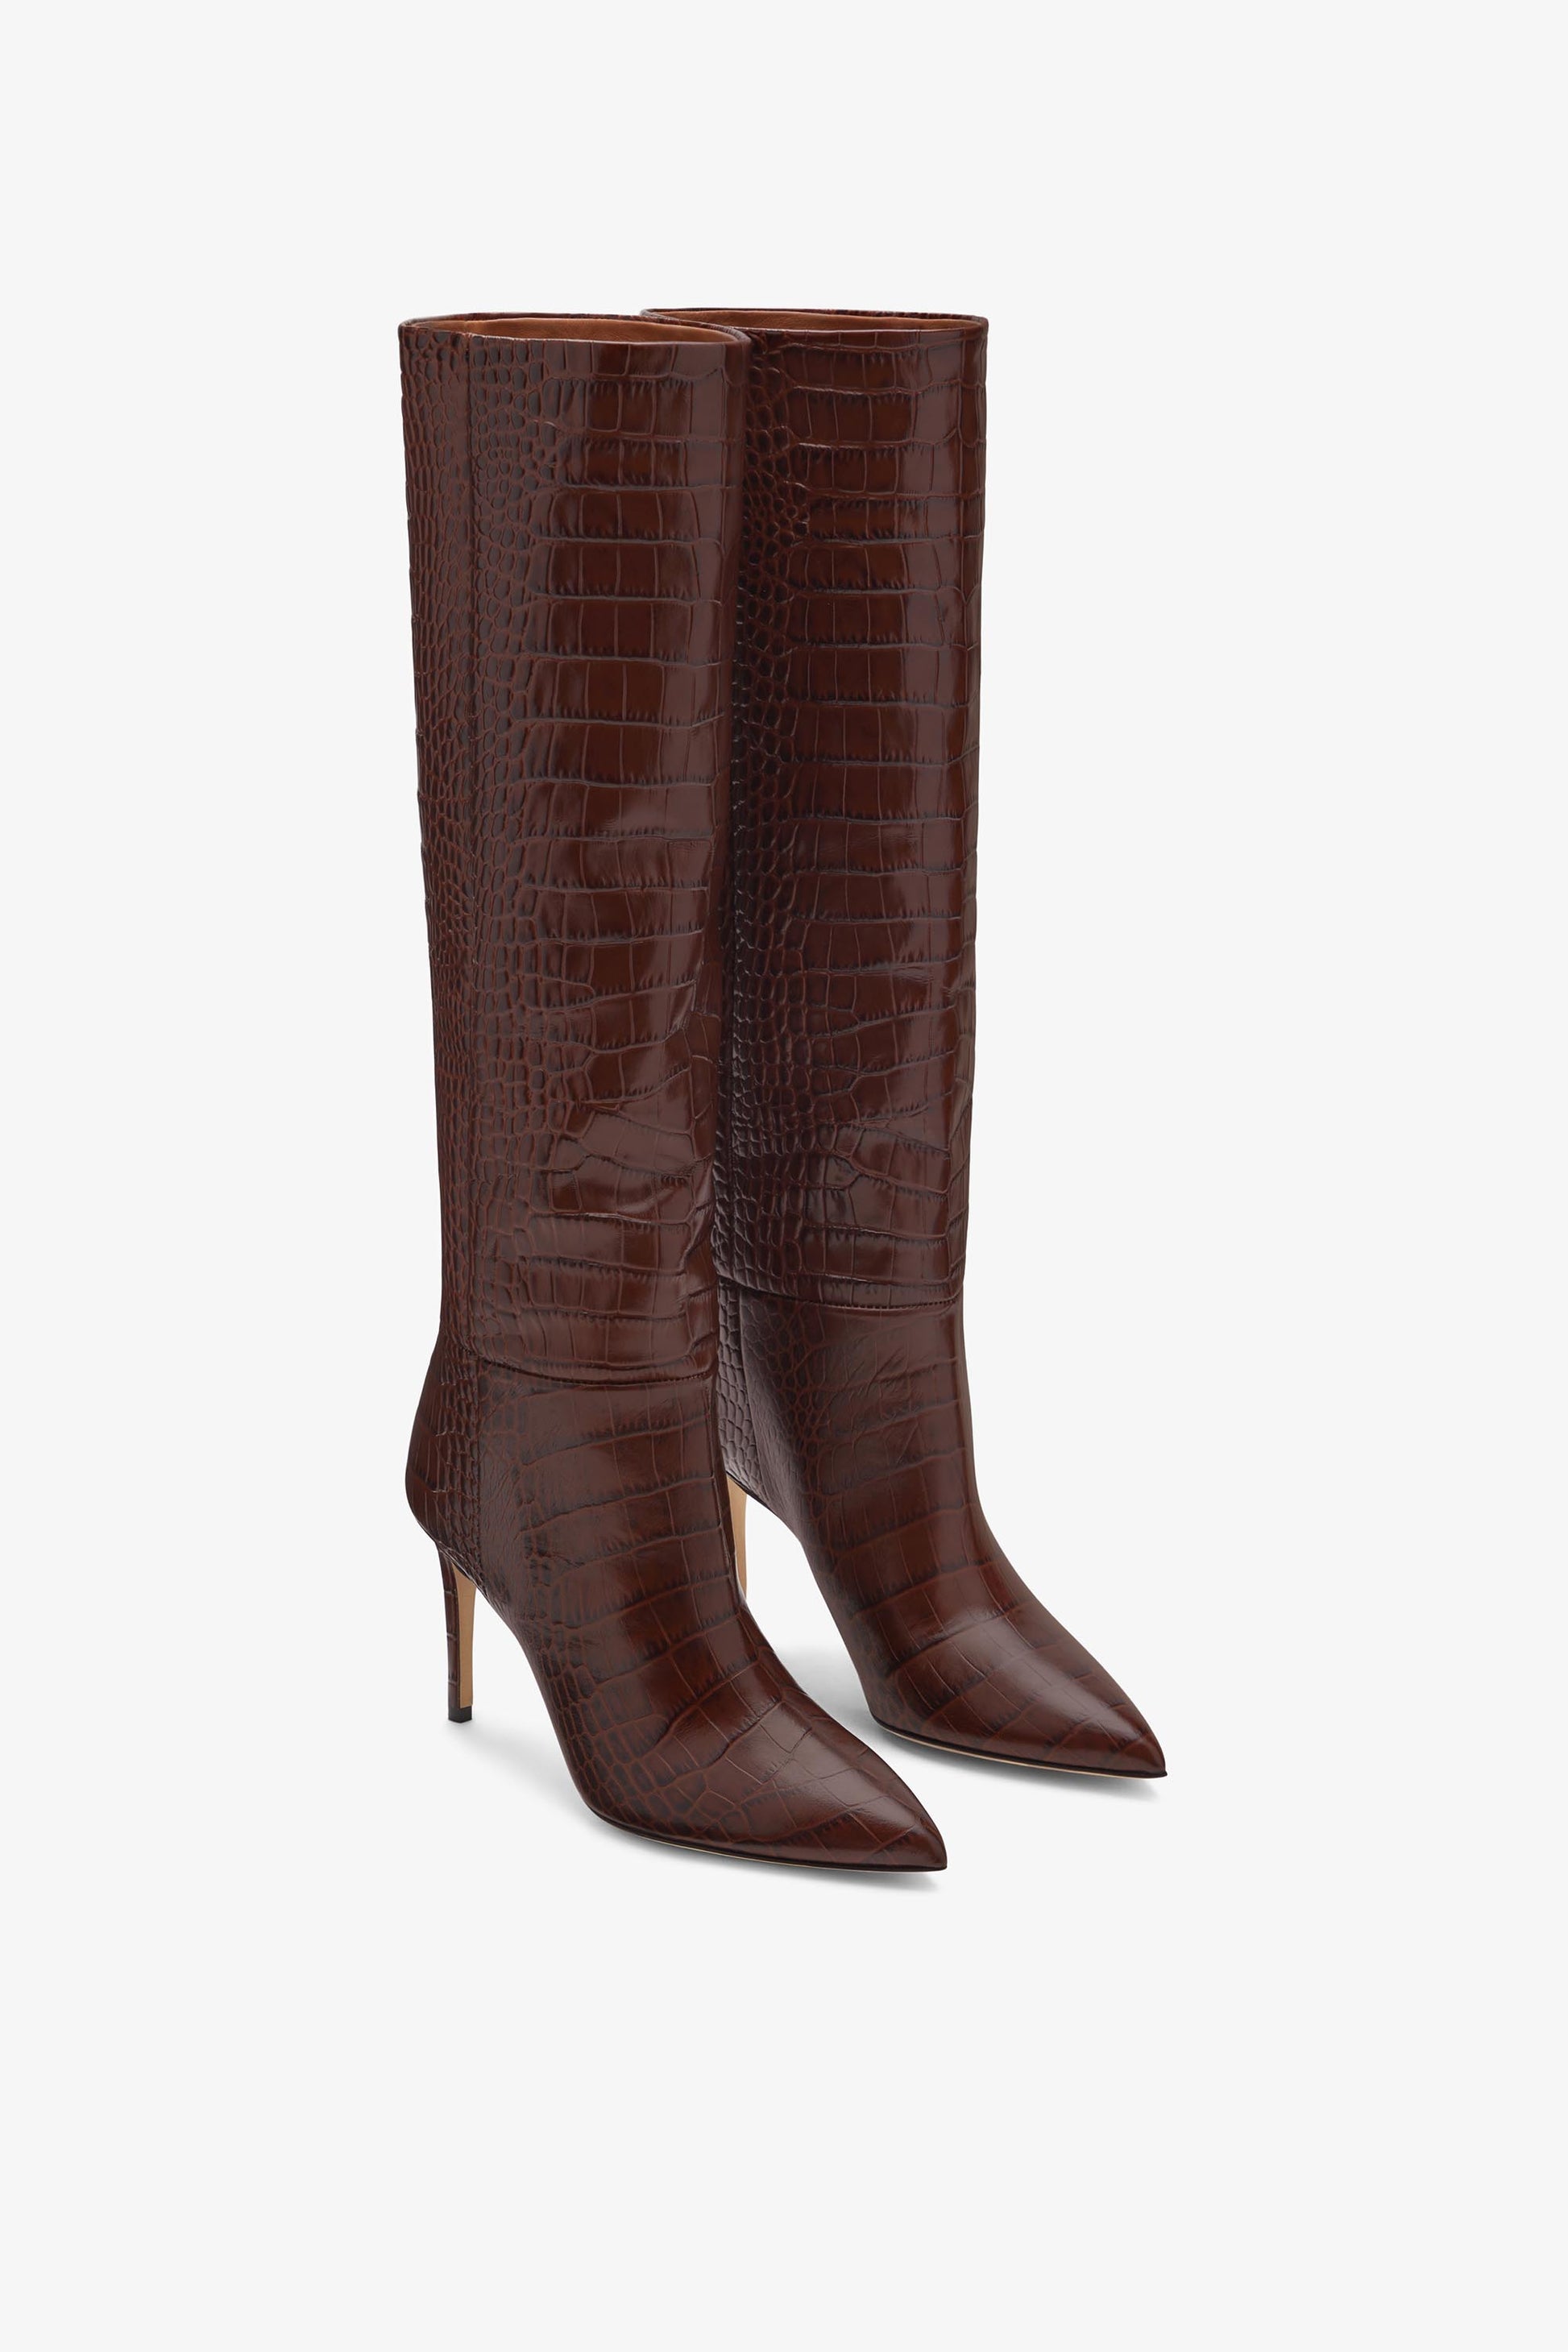 Chocolate brown croc-effect leather heel 85 boots